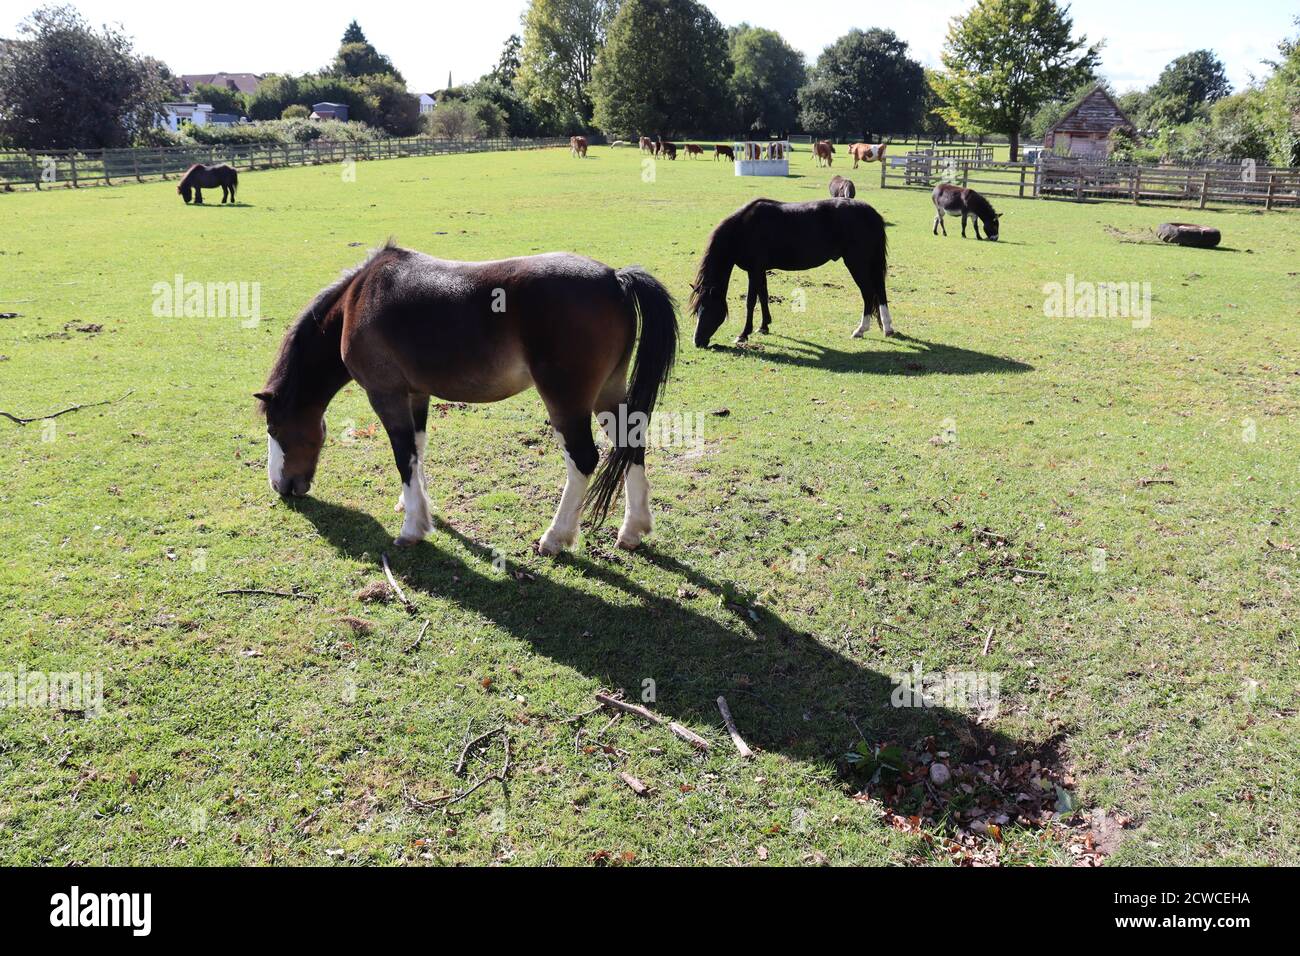 Horses grazing on grass on farm with livestock animals in the background. Stock Photo